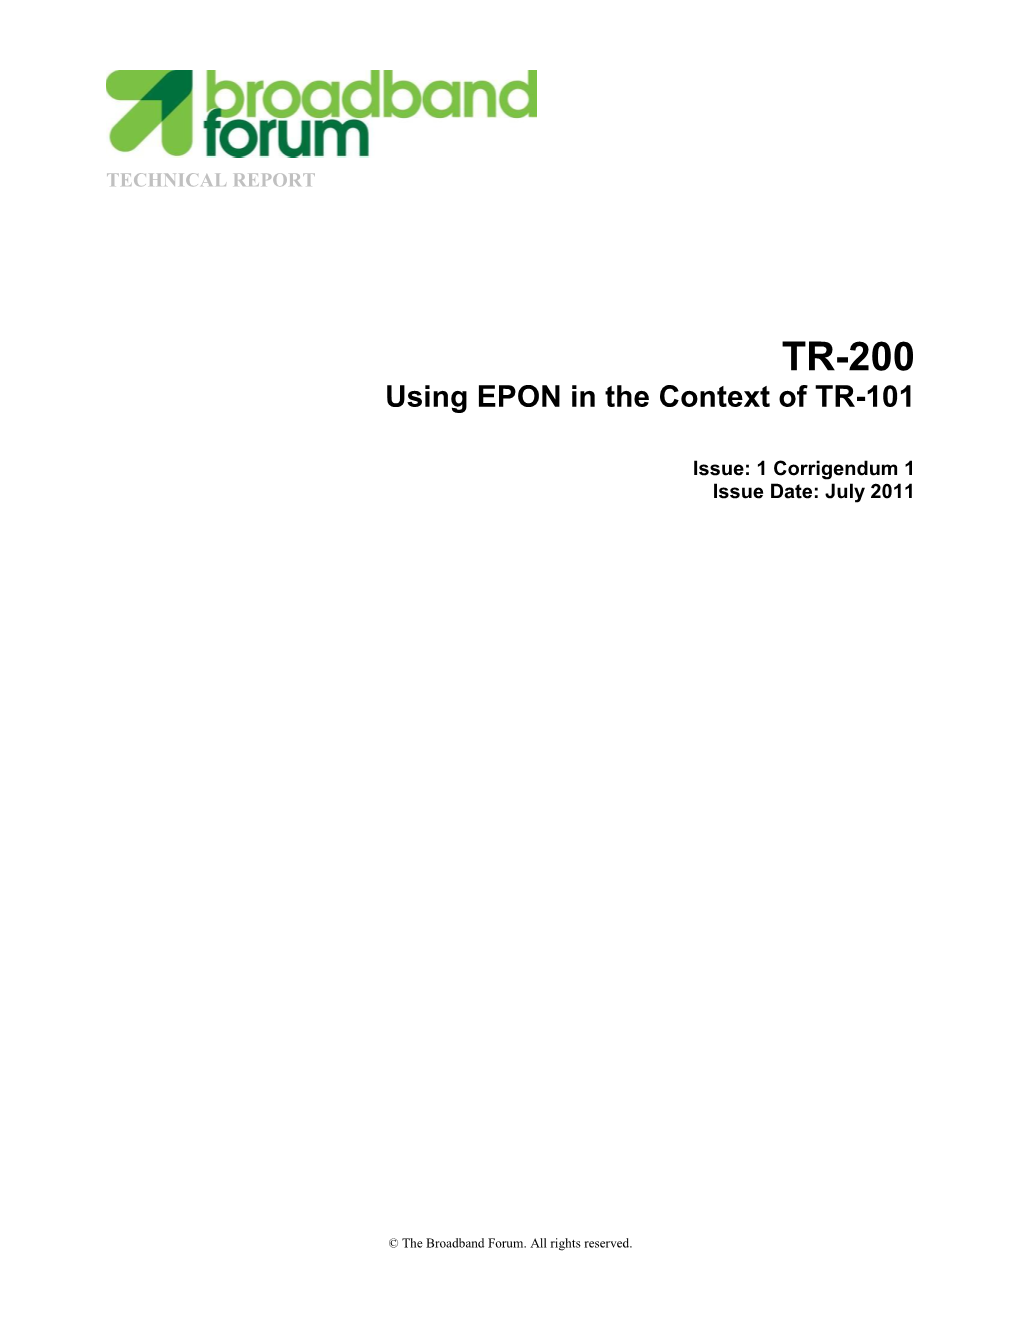 TR-200 Using EPON in the Context of TR-101